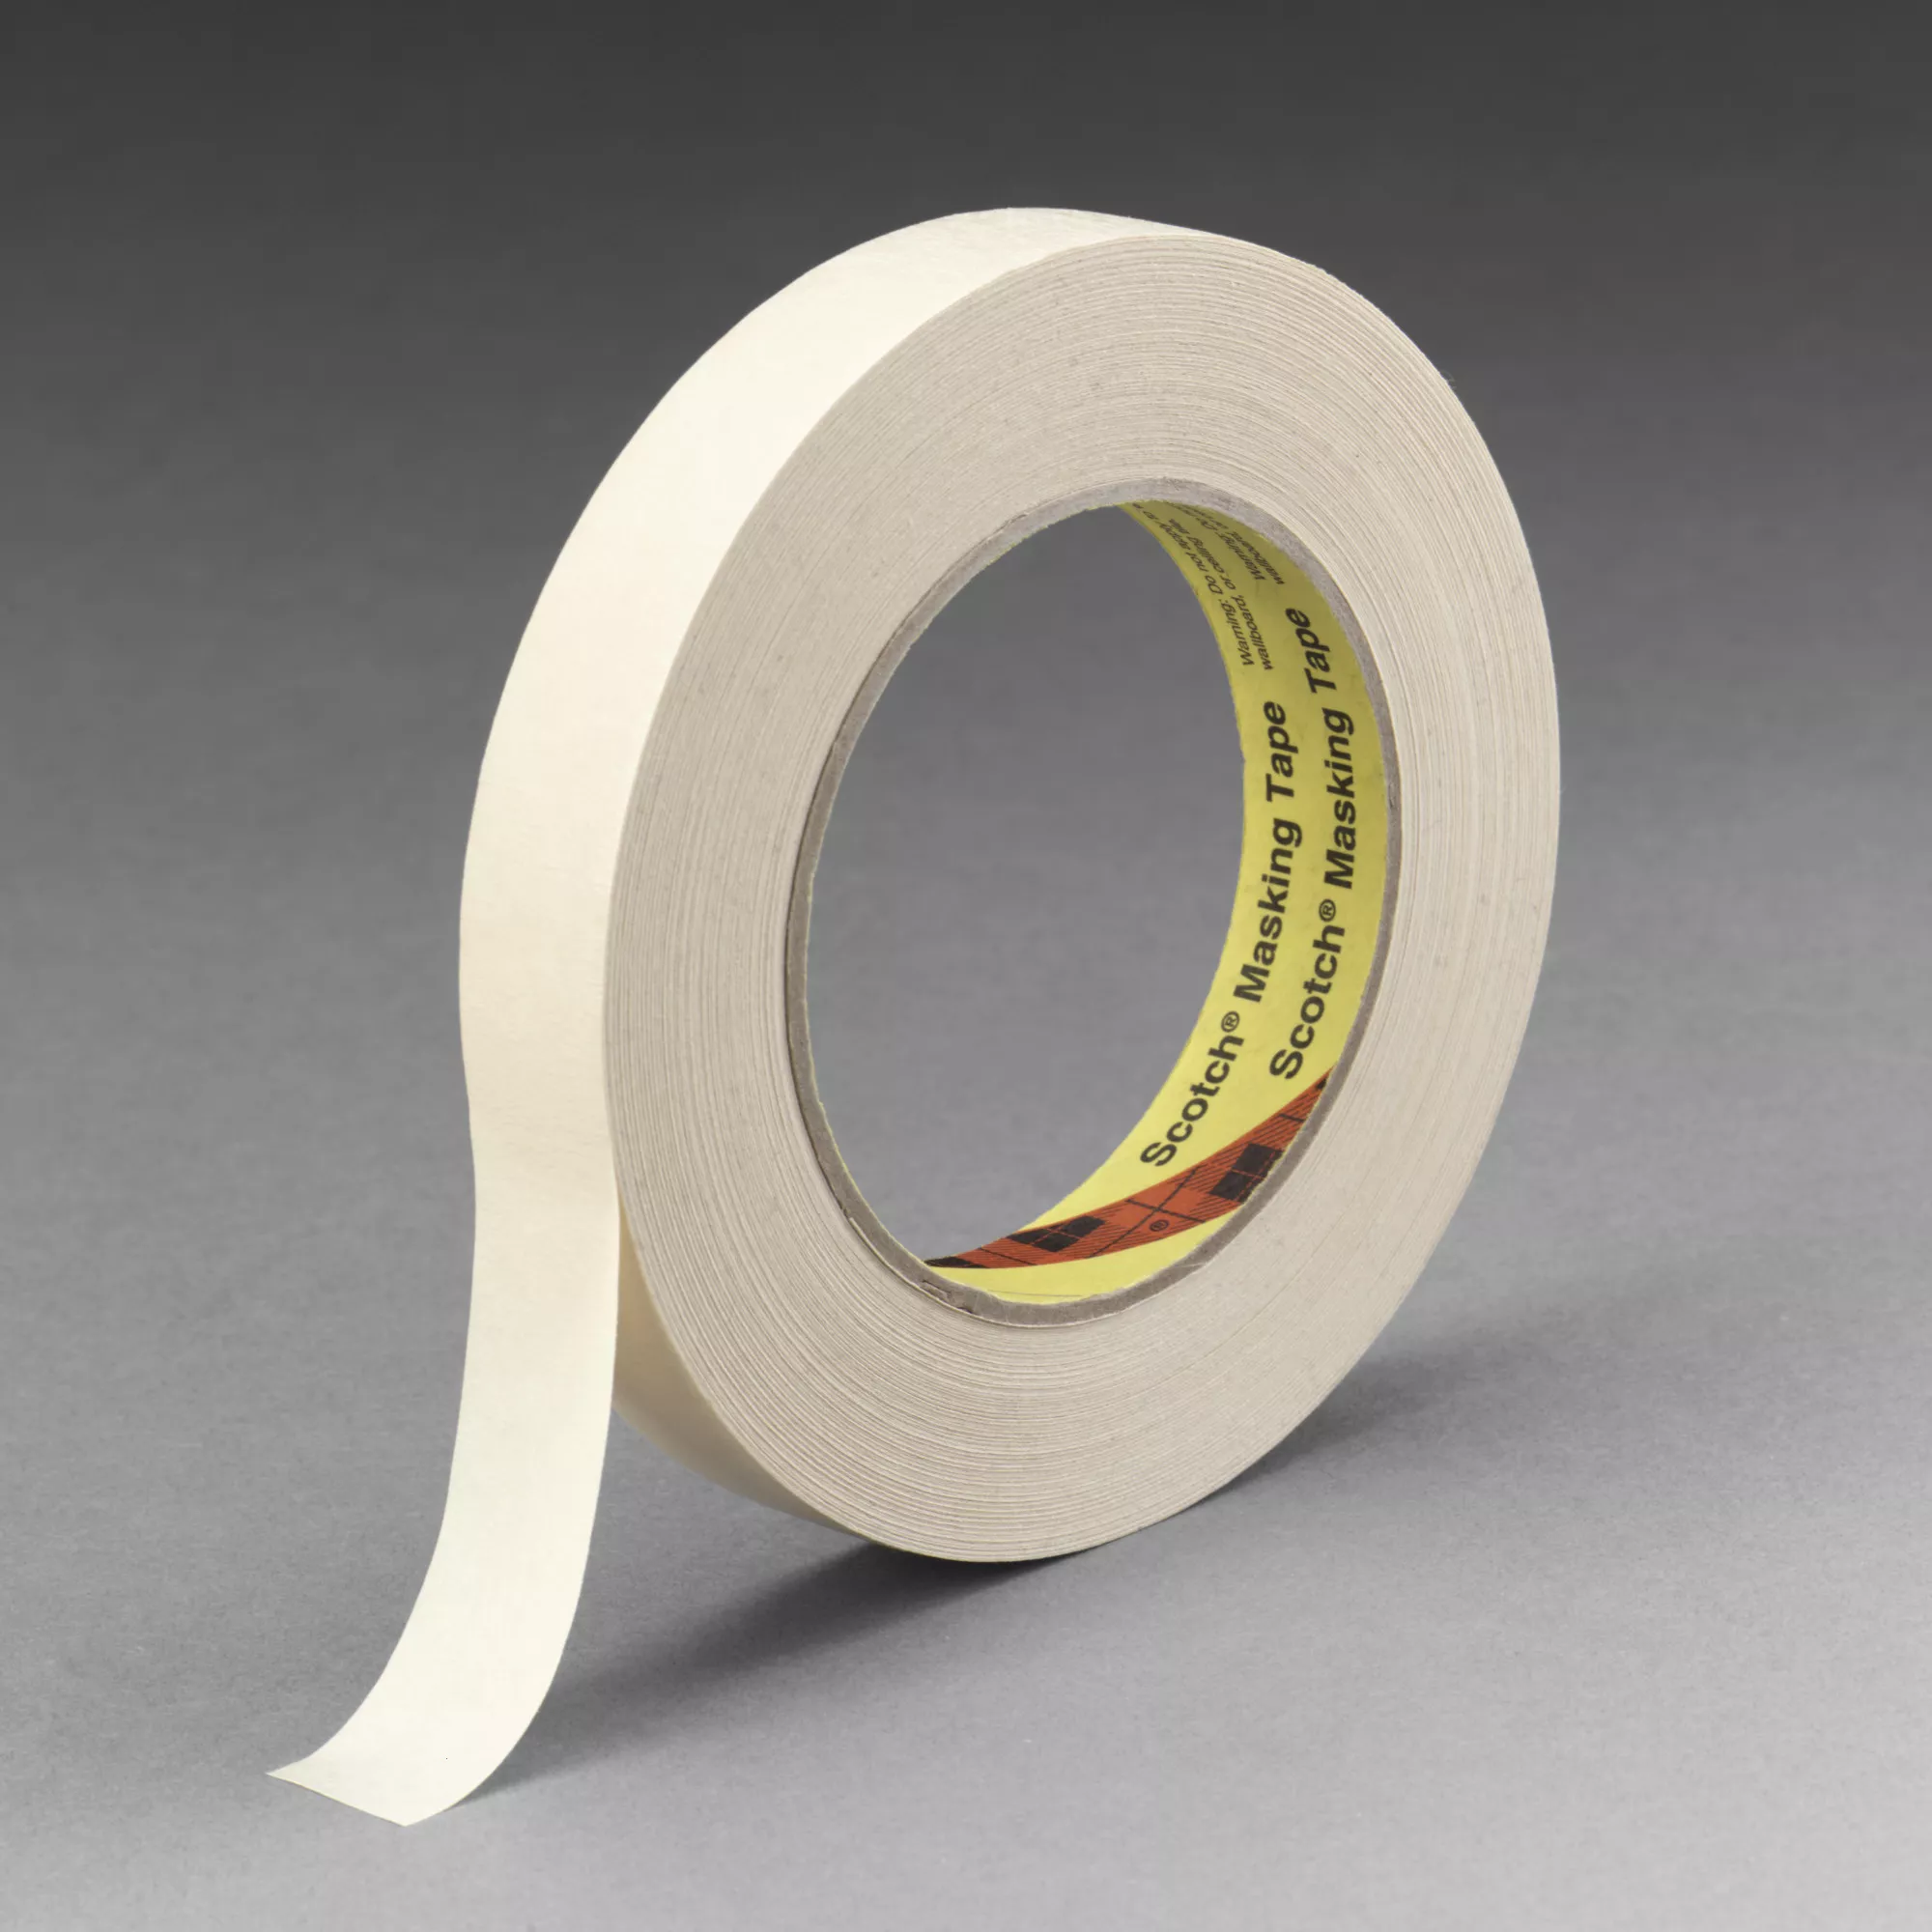 Product Number 232 | 3M™ High Performance Masking Tape 232